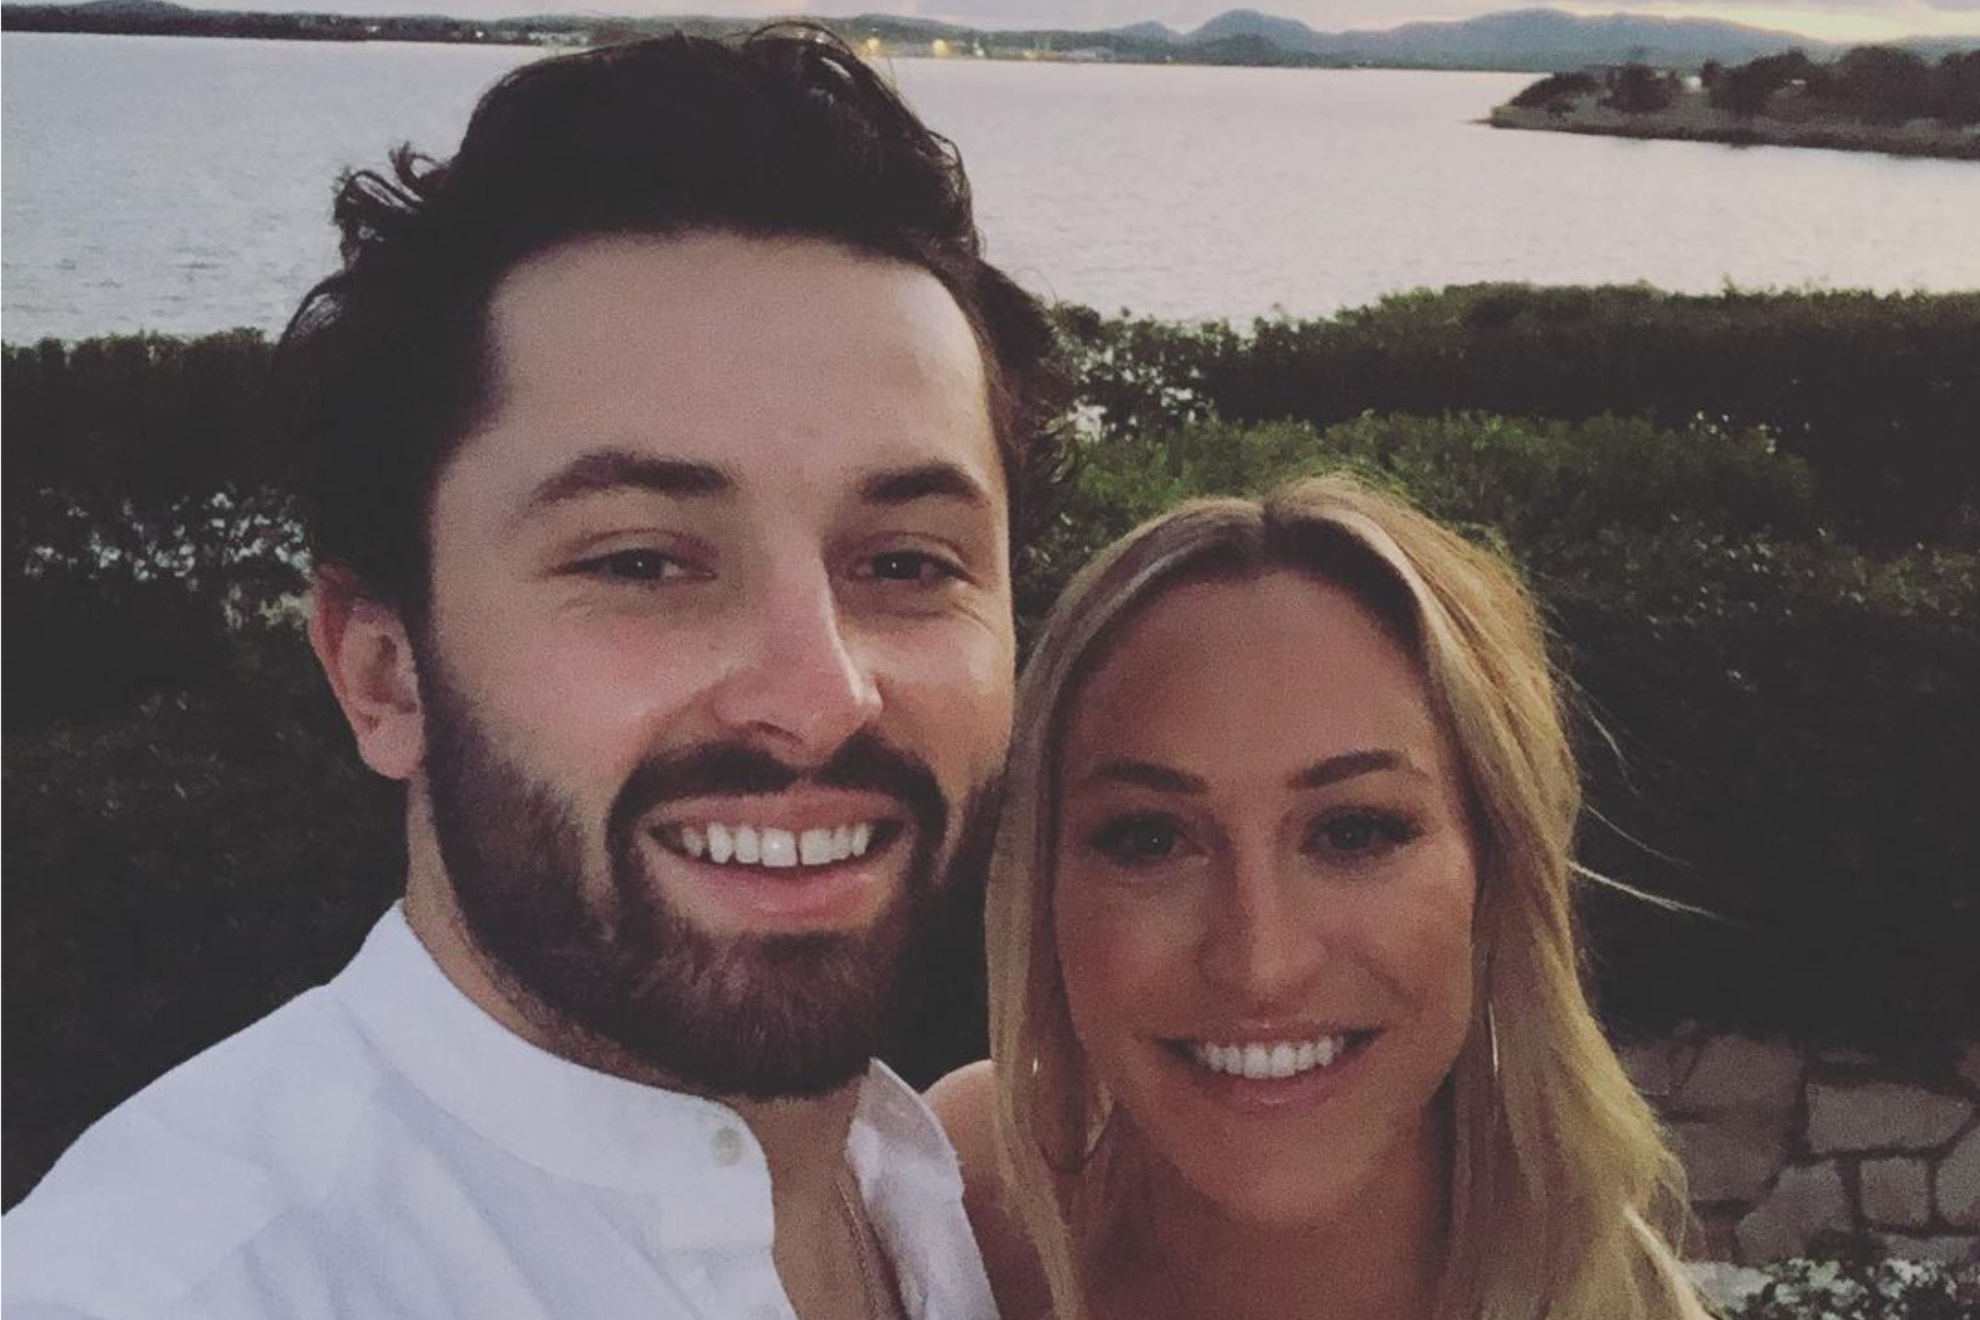 Free agent baker Mayfield and his wife Emily.